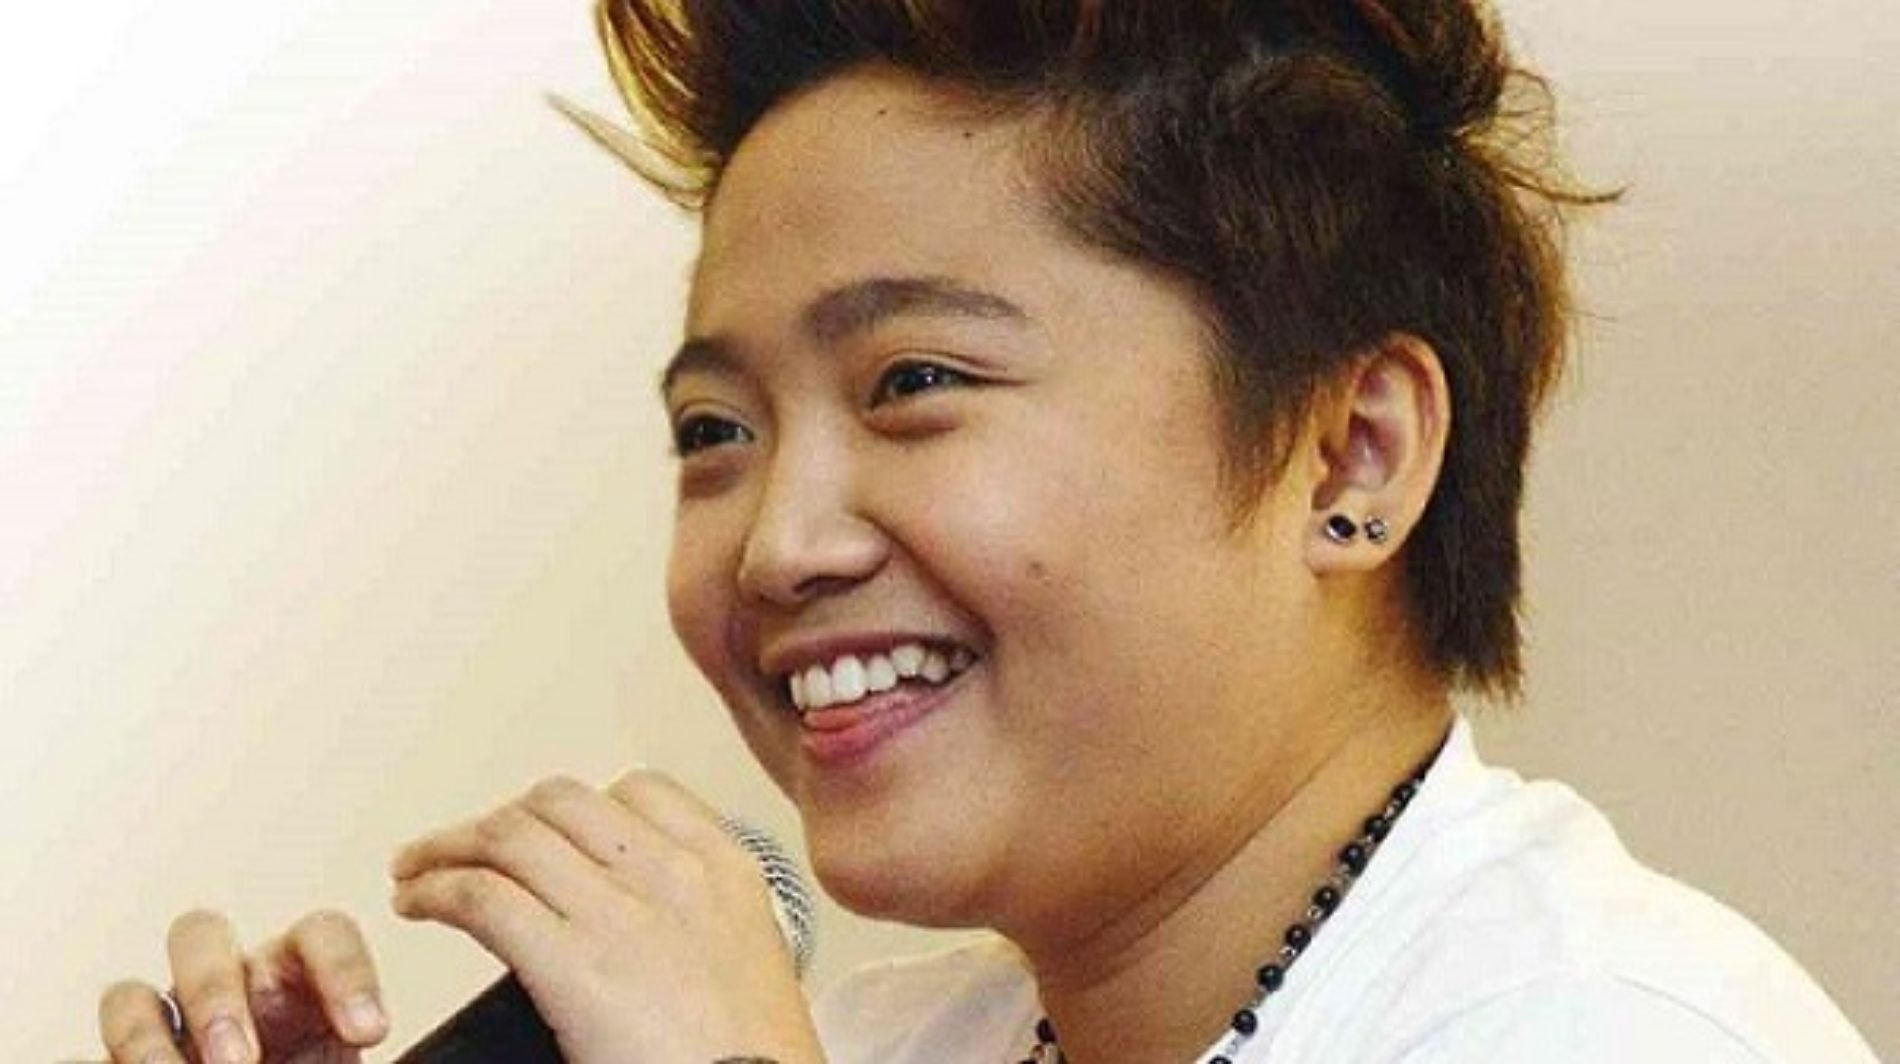 ‘I Have A Male Soul.’ – says Singer Charice